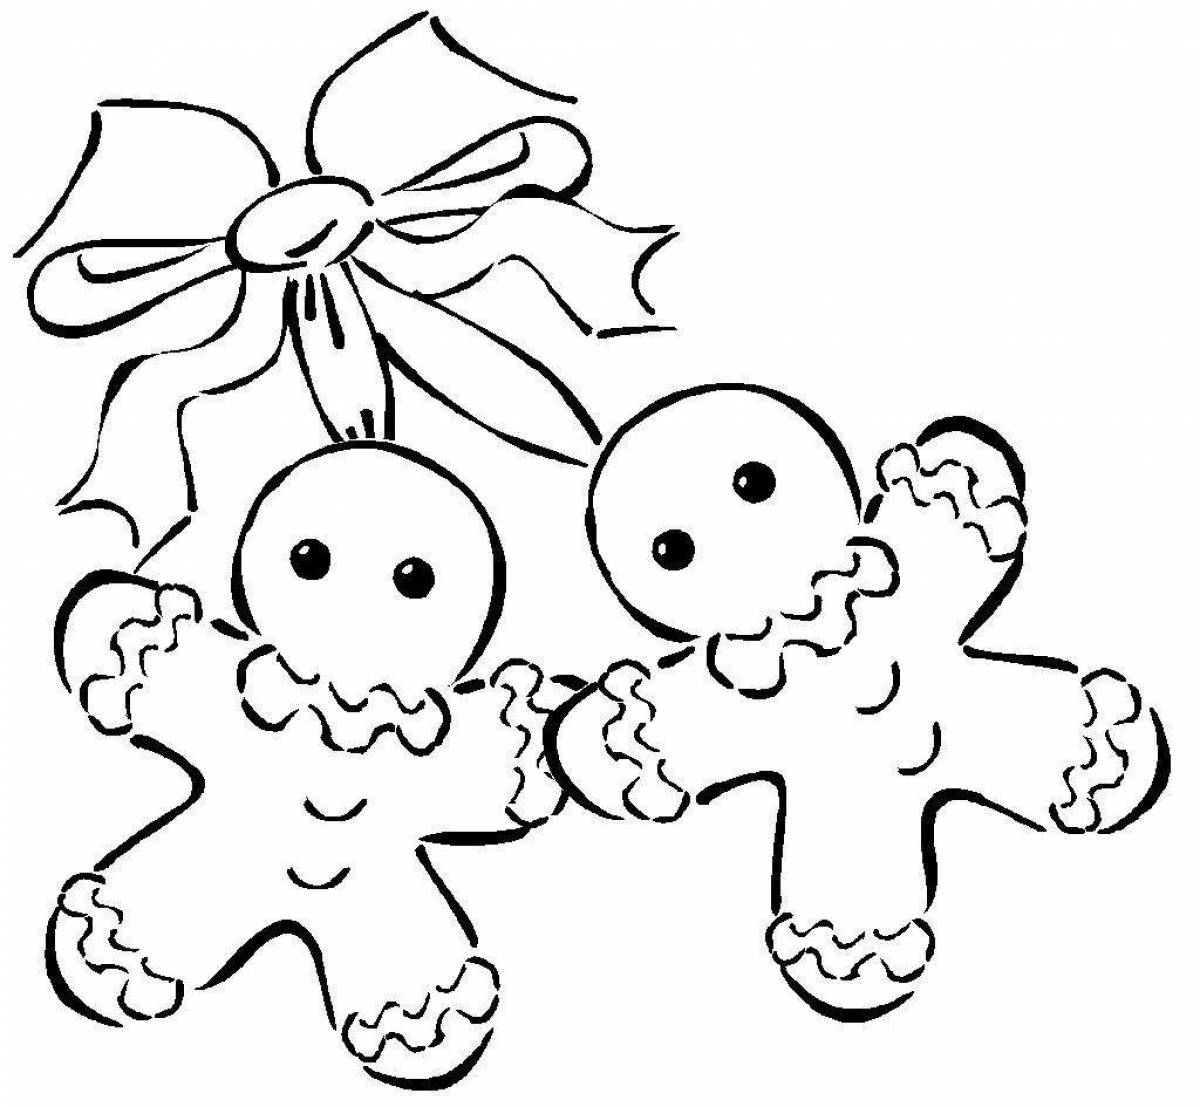 Decorated Christmas drawing